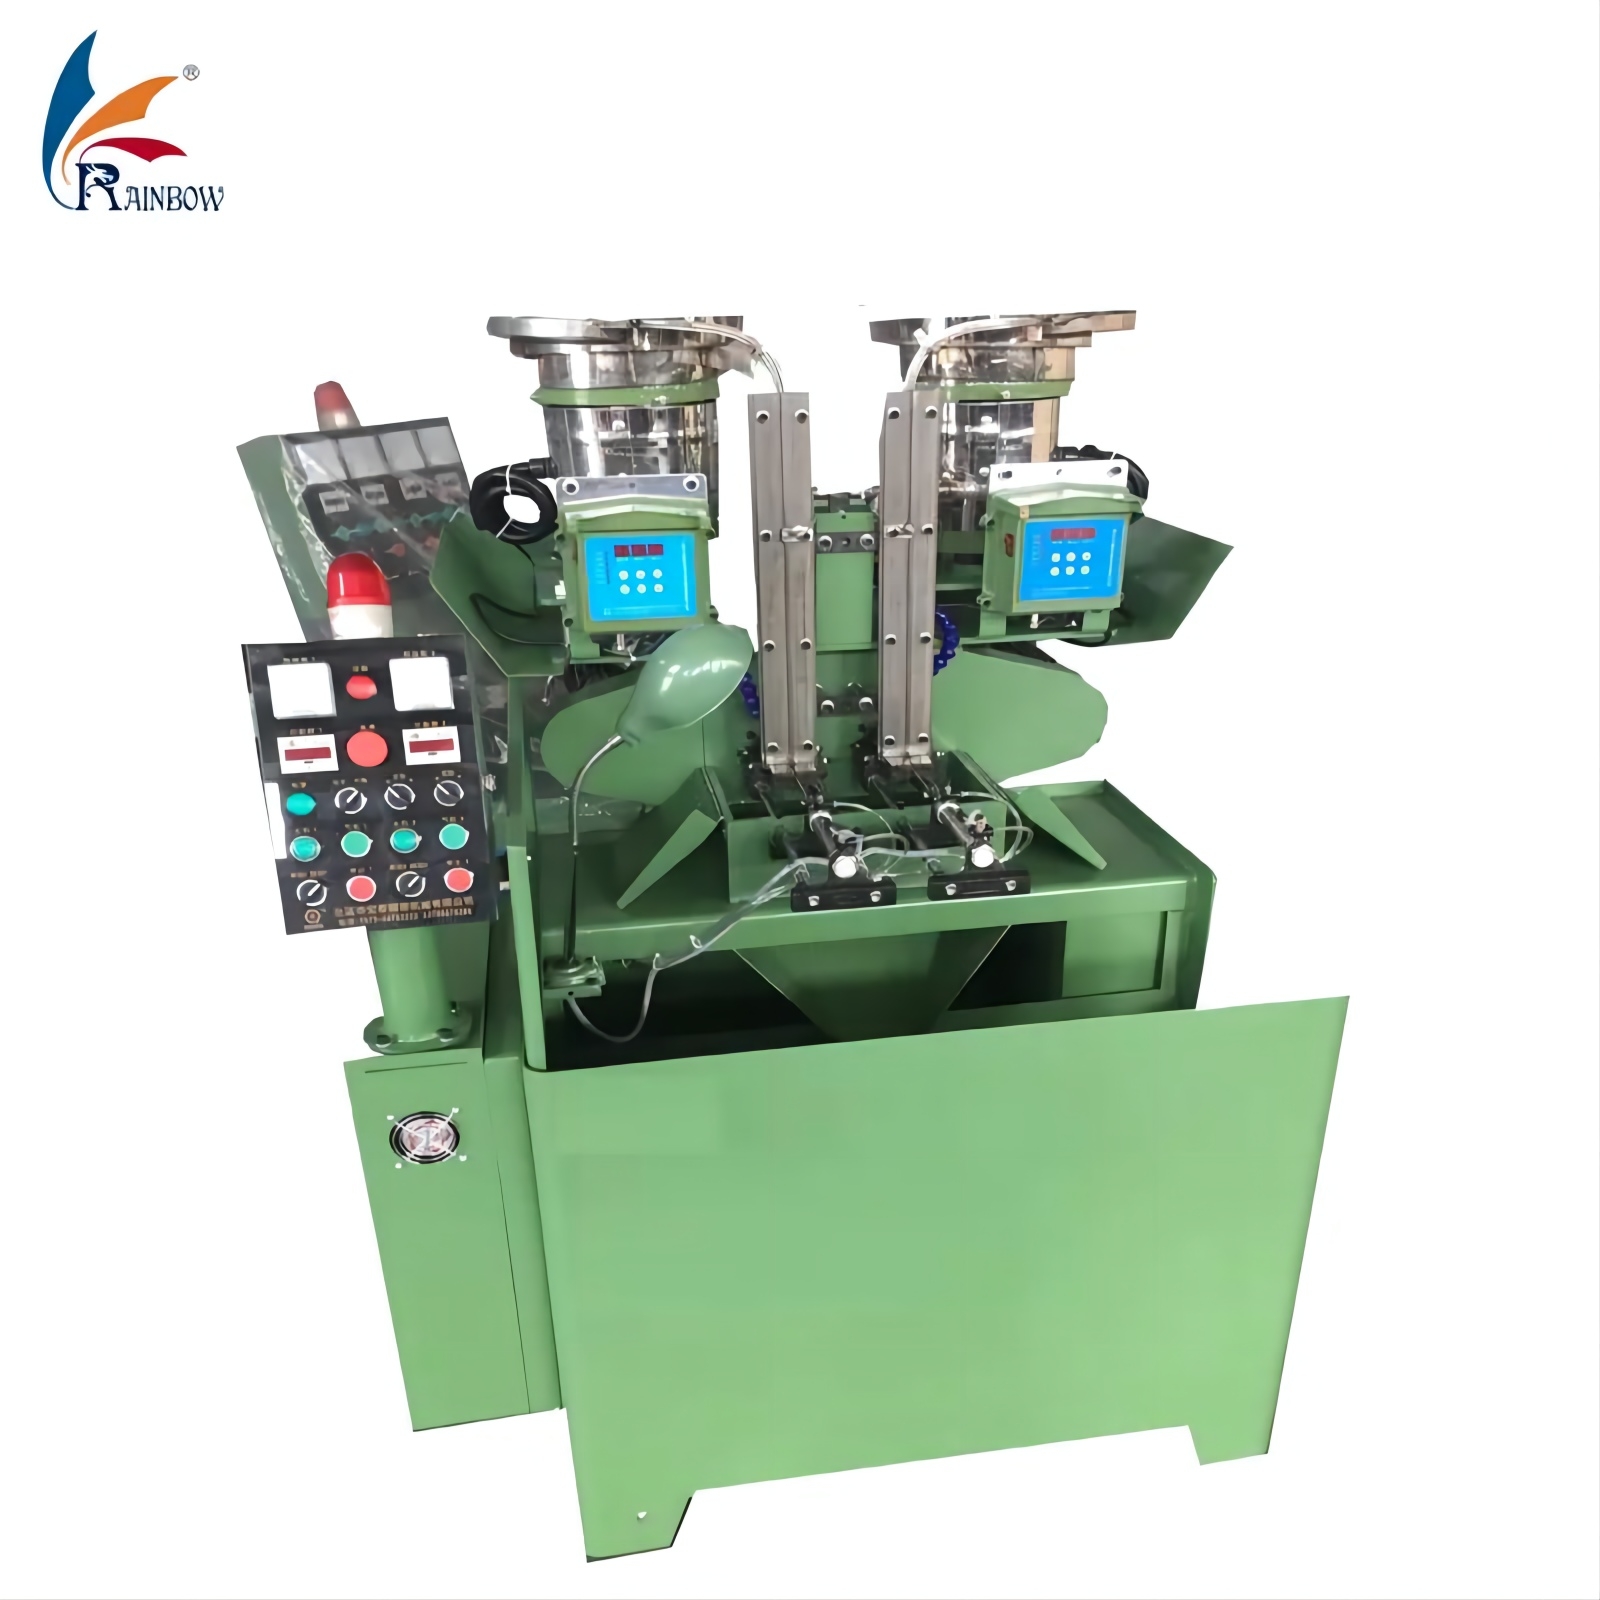 Rainbow Hot Sale Nut Tapping Machine Automatic Nut Tapper